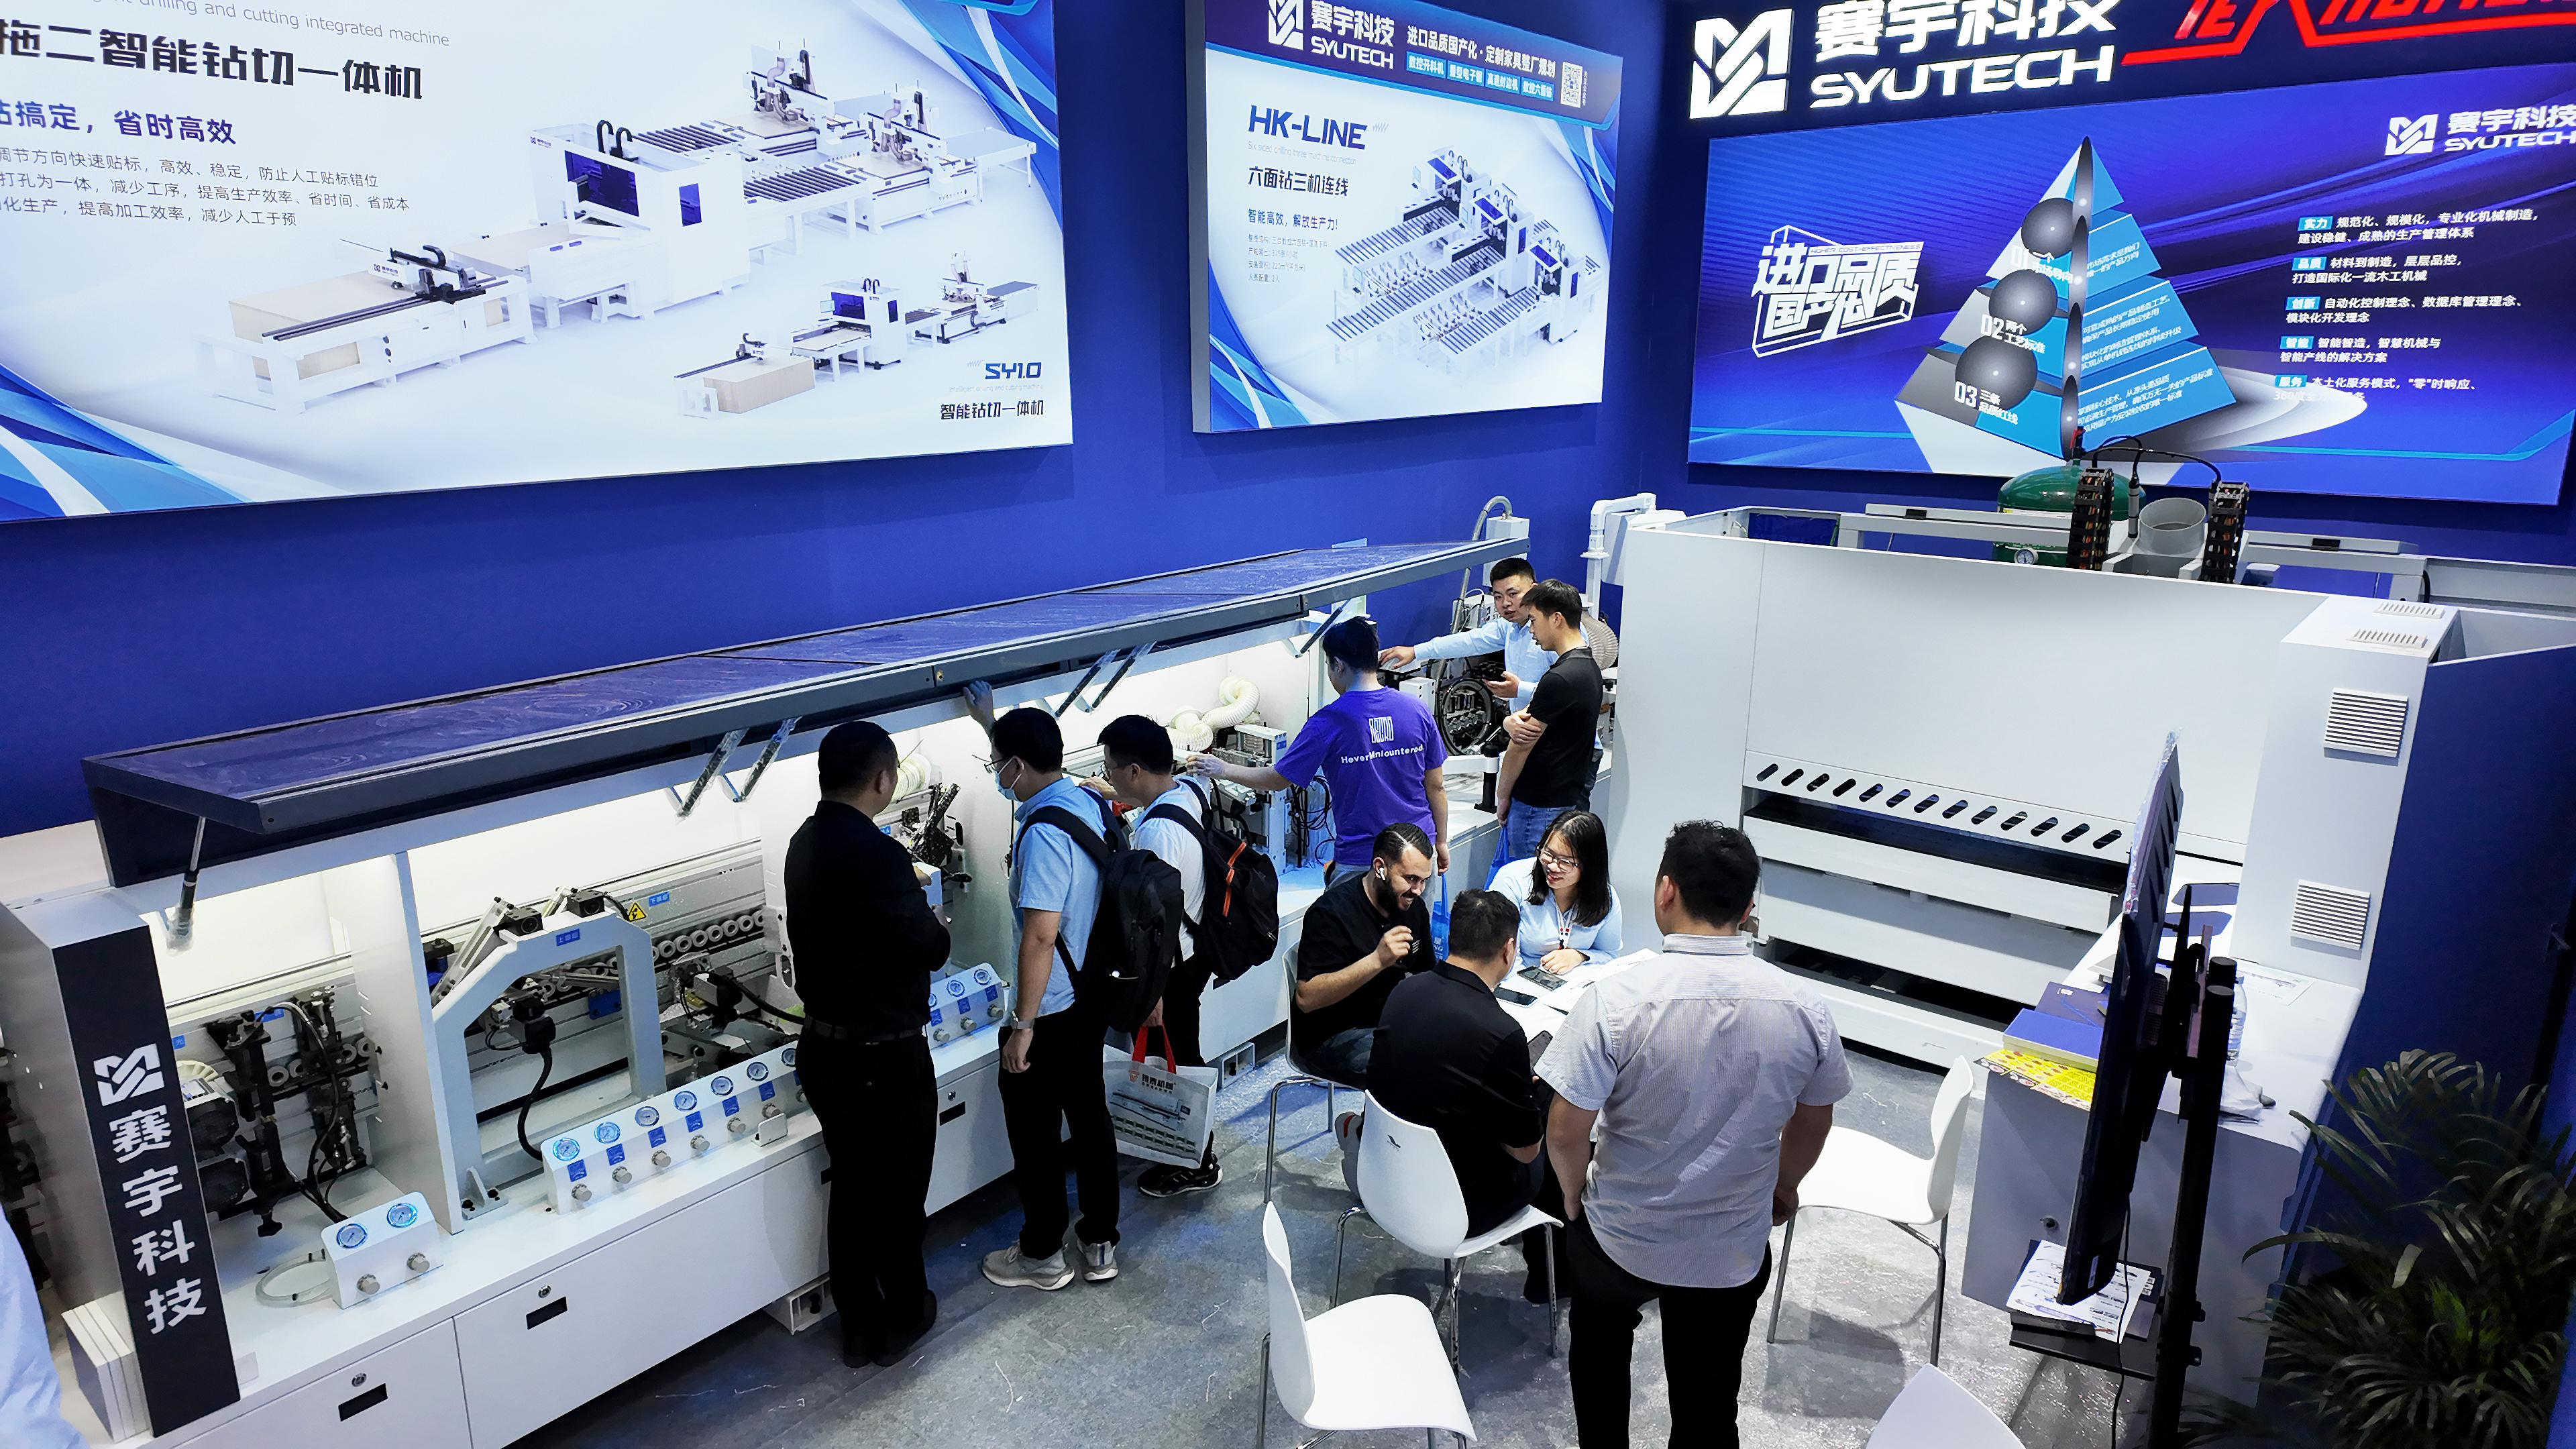 The event was full of enthusiasm and ended successfully | CIFF Guangzhou Exhibition Saiyu Technology shines